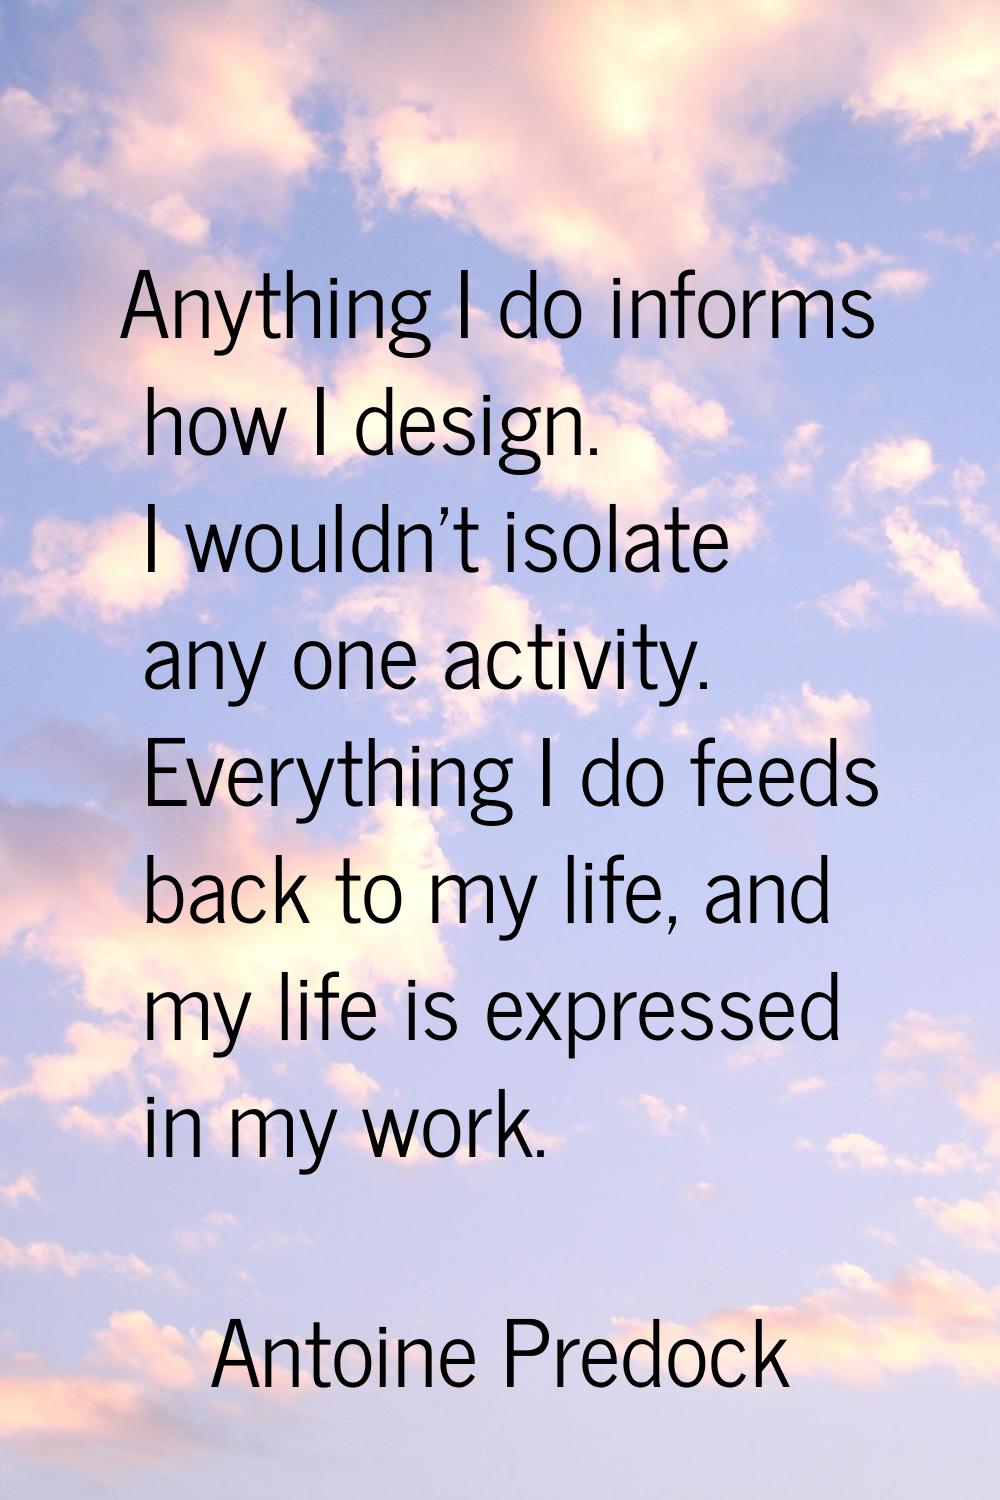 Anything I do informs how I design. I wouldn't isolate any one activity. Everything I do feeds back